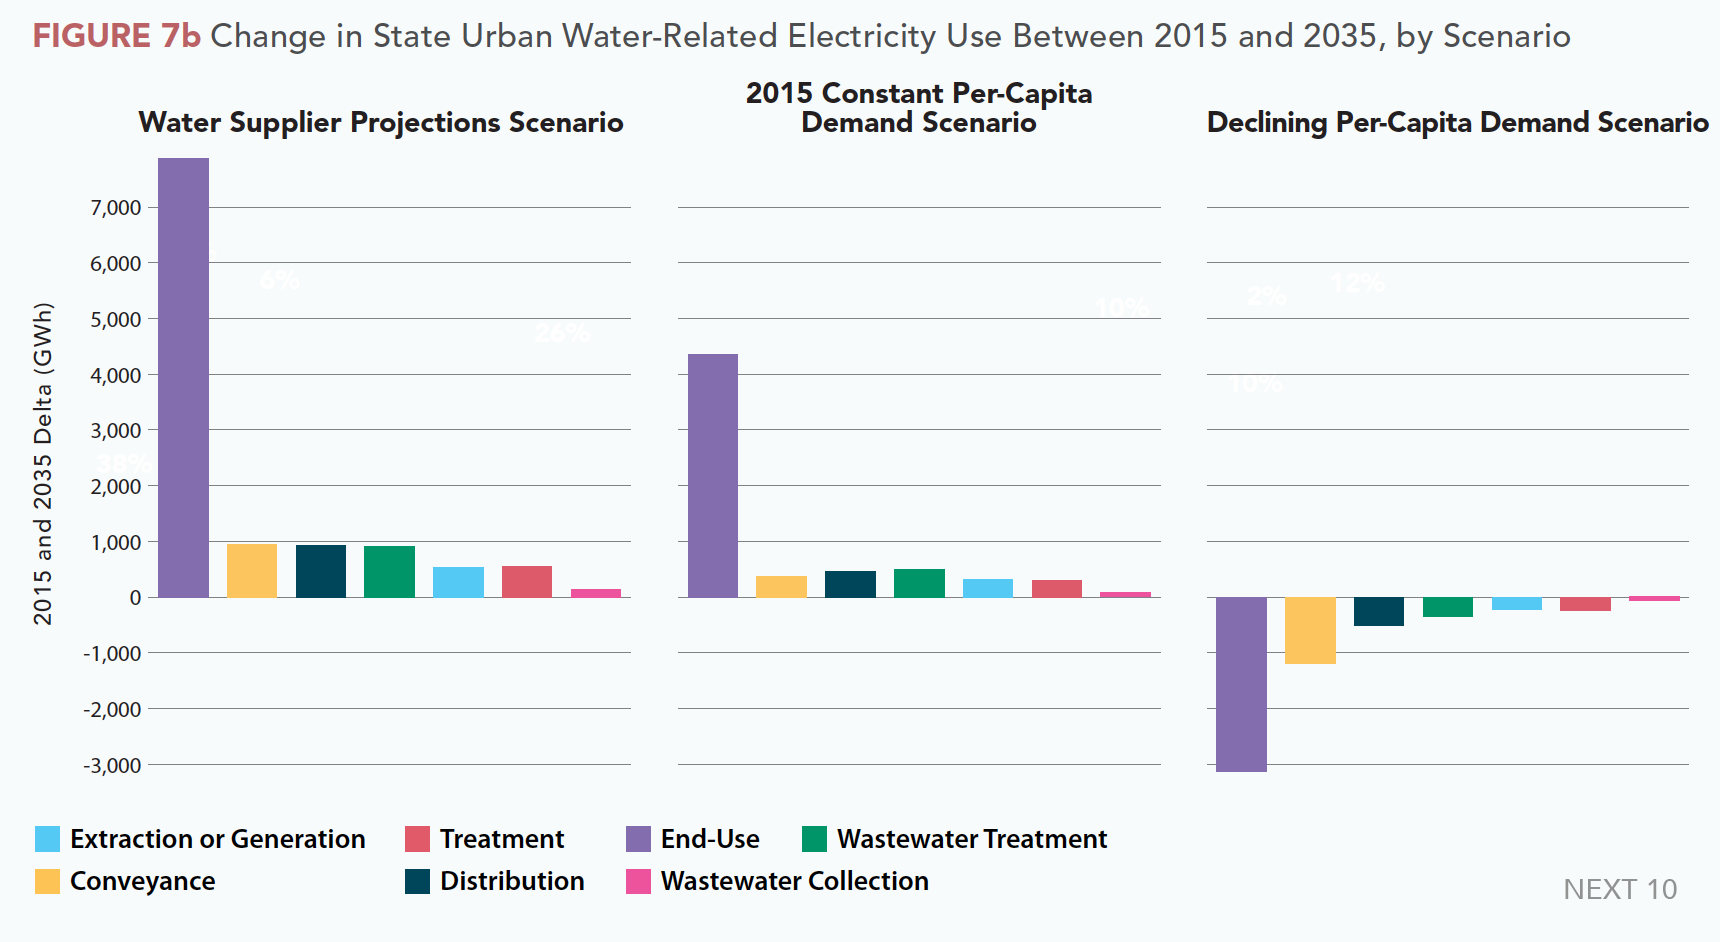 Figure 7b. Change in State Urban Water-Related Electricity Use Between 2015 and 2035, by Scenario